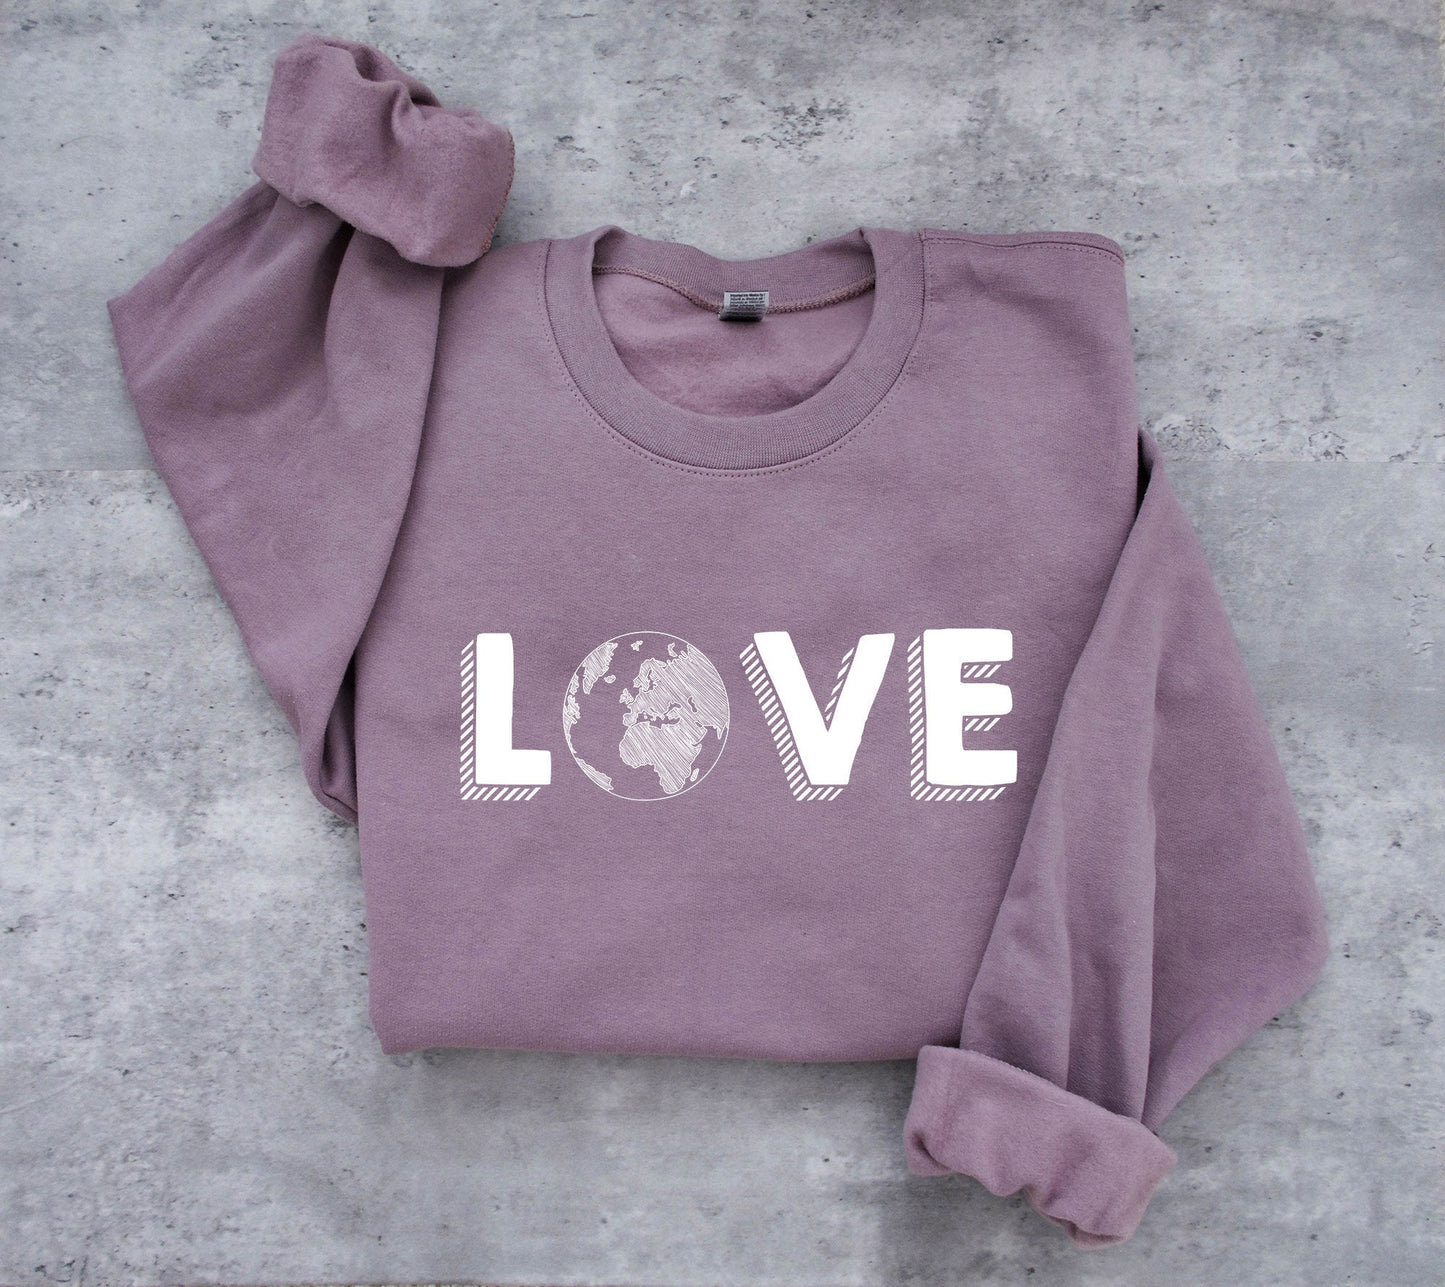 Love Word With Hand Drawn Earth Ultra Cozy Retro Drop Shoulder Graphic Sweatshirt Unisex Soft Tee T-shirt for Women or Men